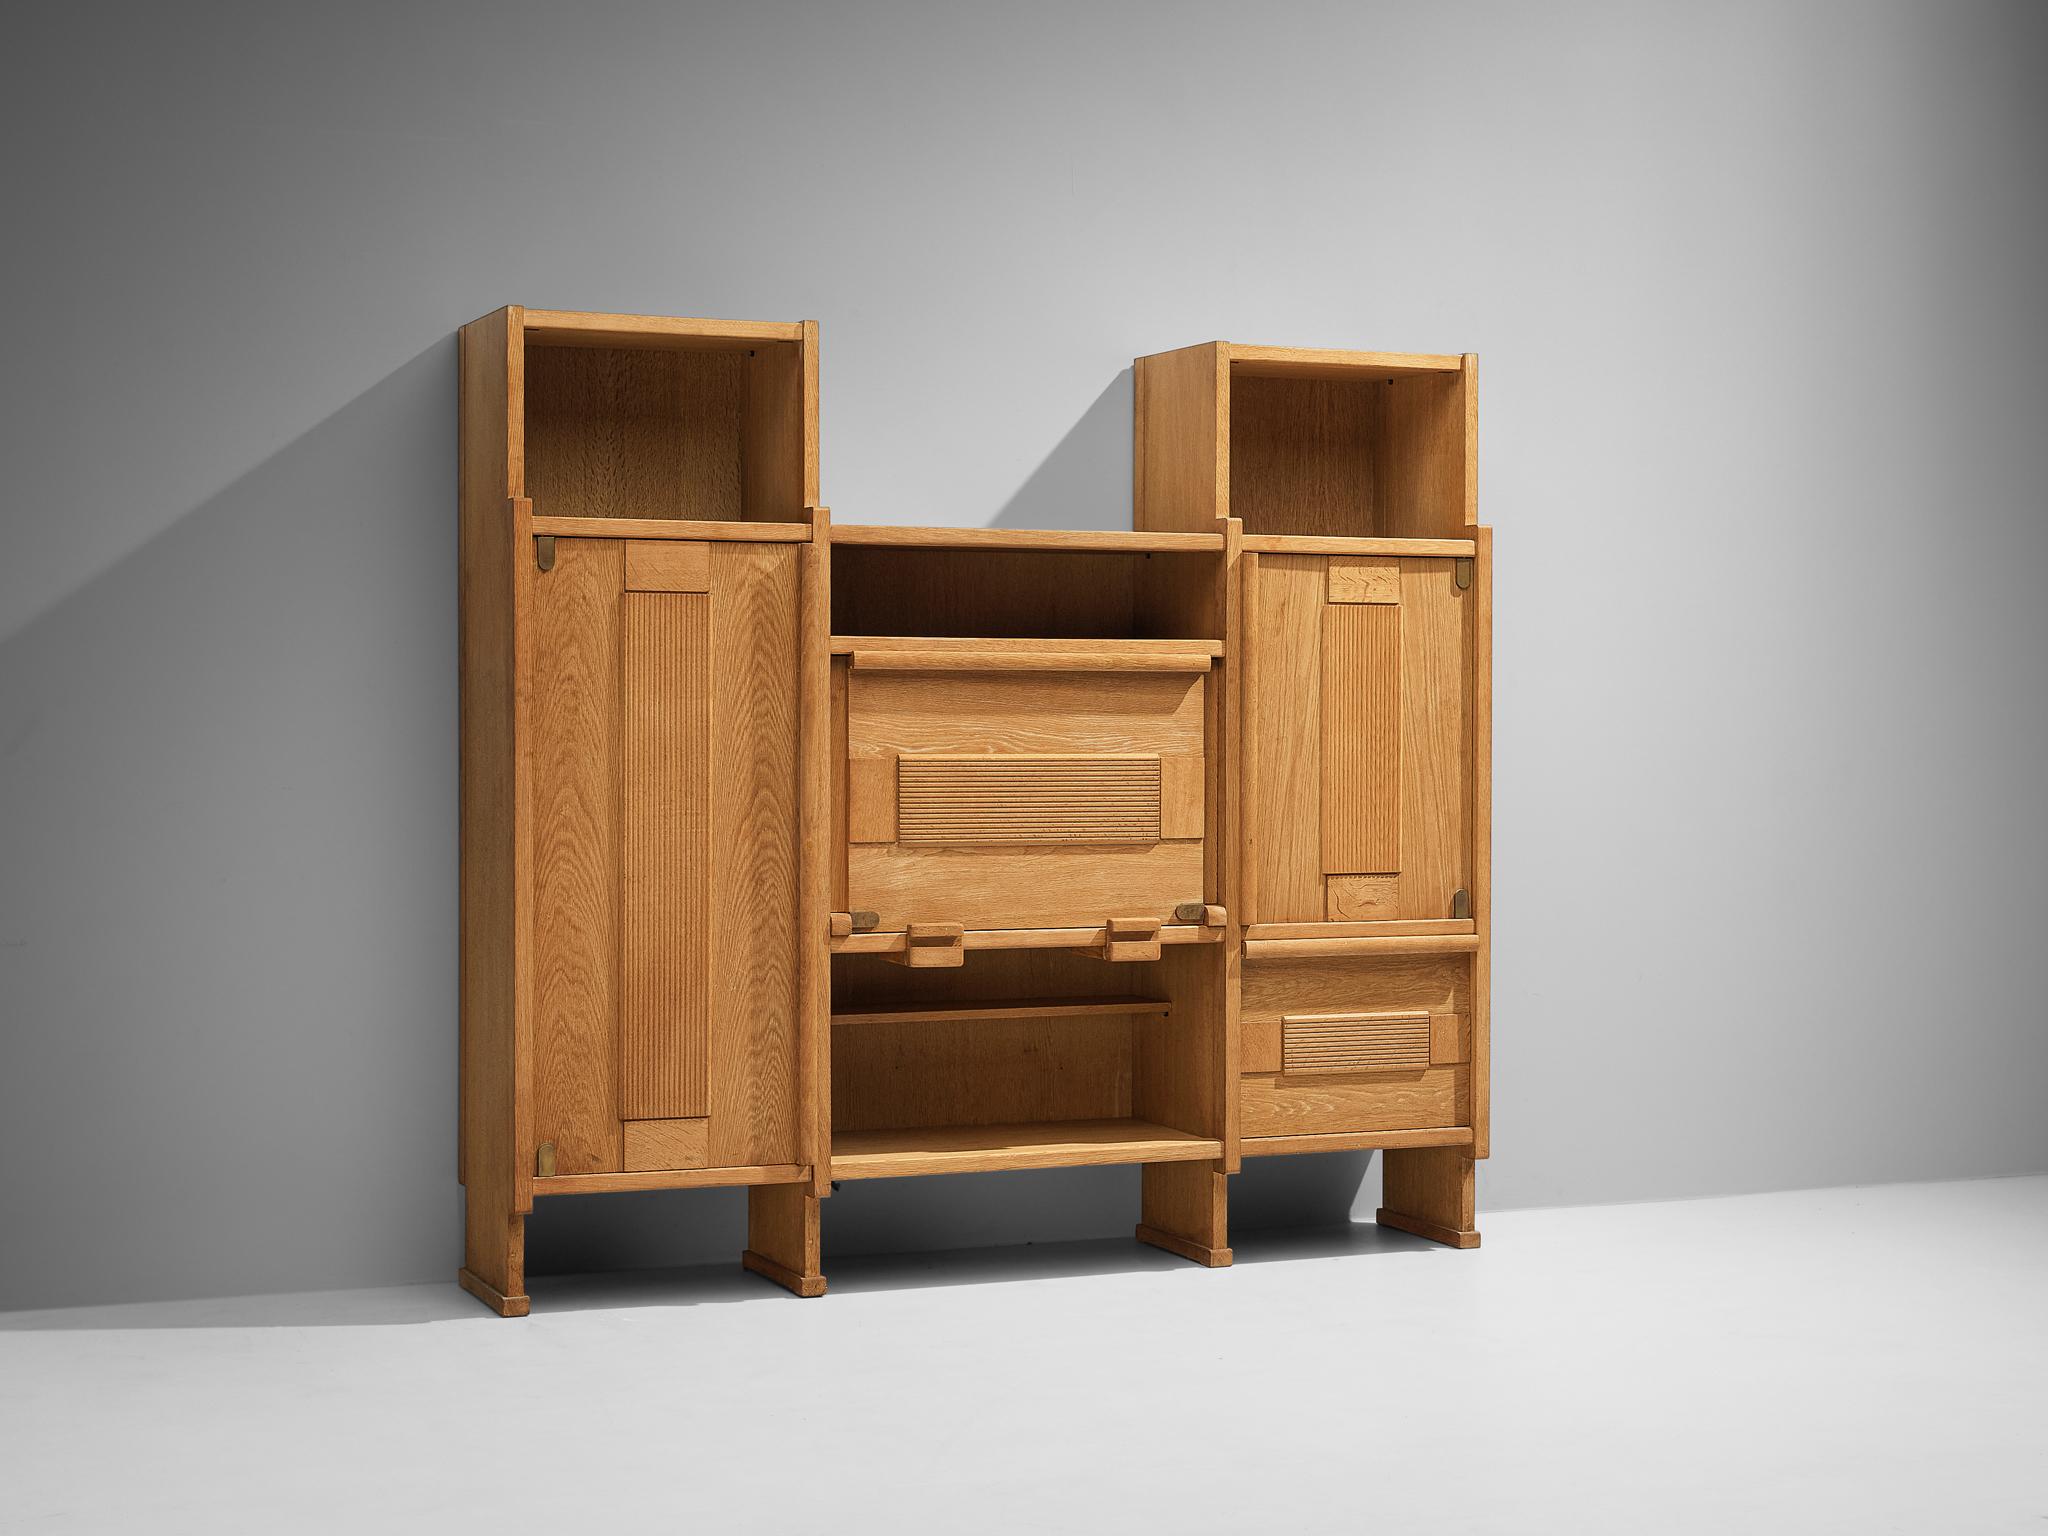 Guillerme et Chambron for Votre Maison, large cabinet, oak, France, 1960s

This excellent and large highboard is a perfect example of the skillfull woodwork by designer duo Guillerme and Chambron. This well-constructed and innovative case piece has